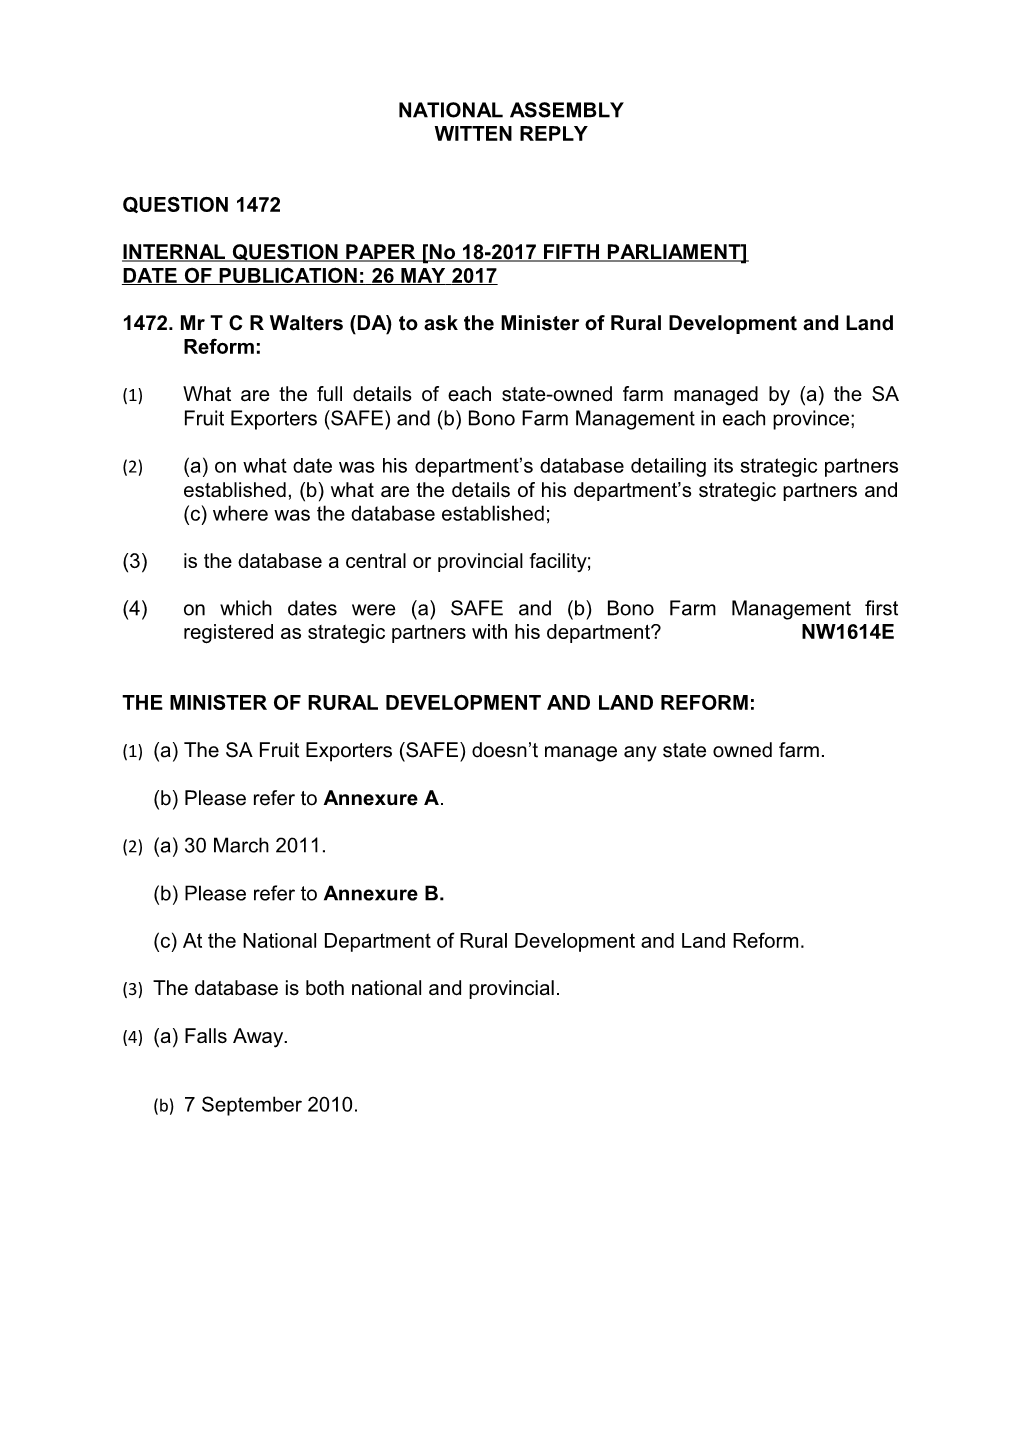 1472. Mr T C R Walters (DA) to Ask the Minister of Rural Development and Land Reform